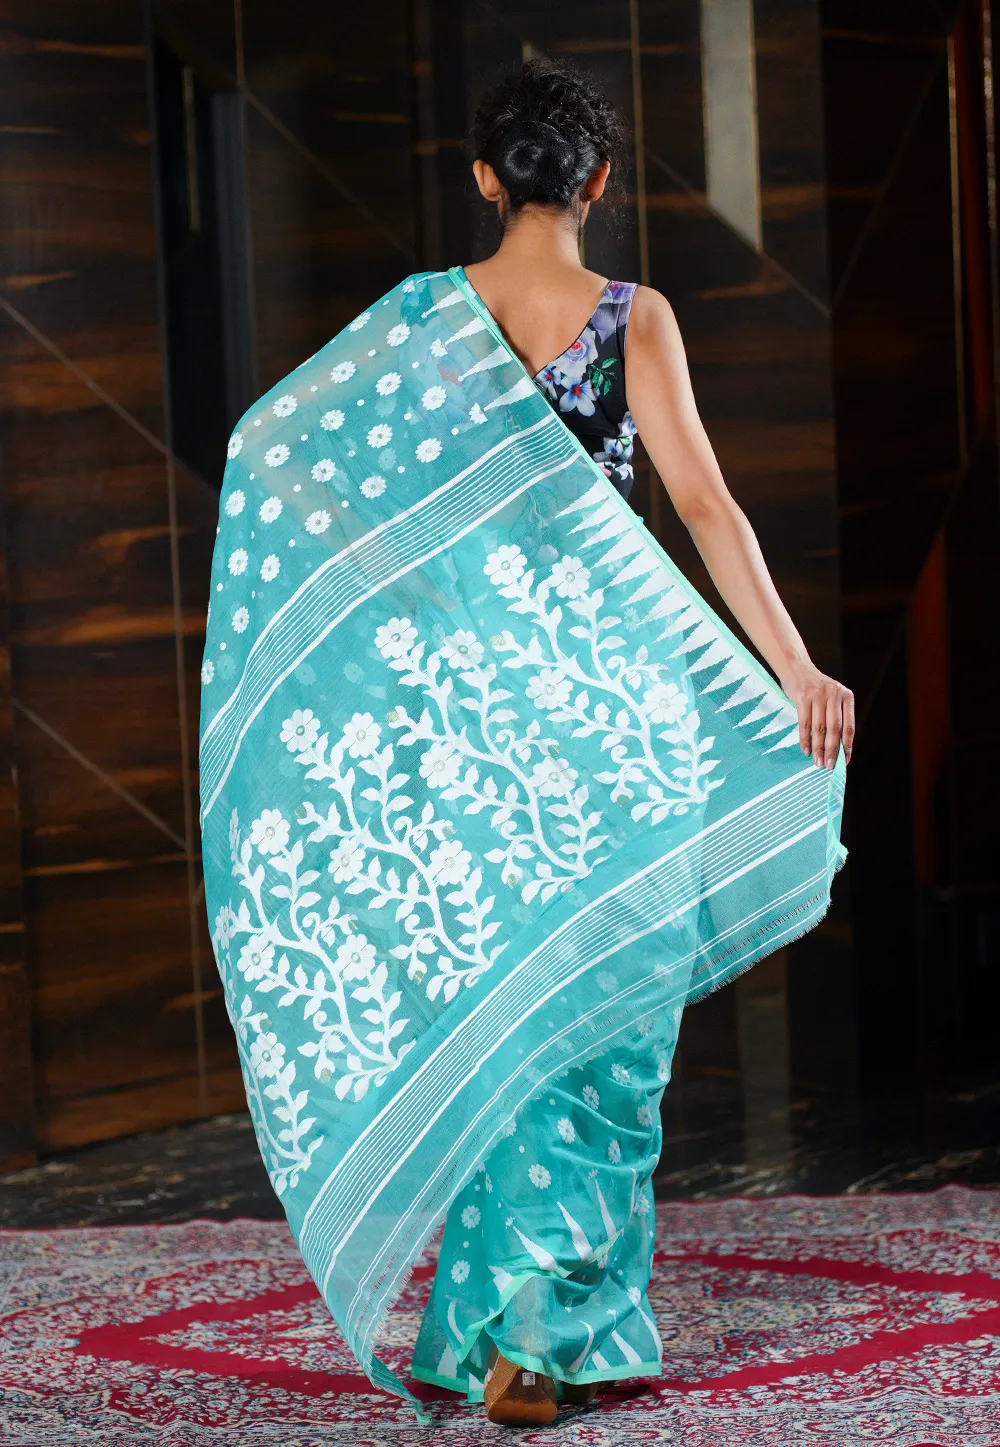 capri blue jamdani saree with white and gold floral woven motifs 5f489836d74a2 1598593078